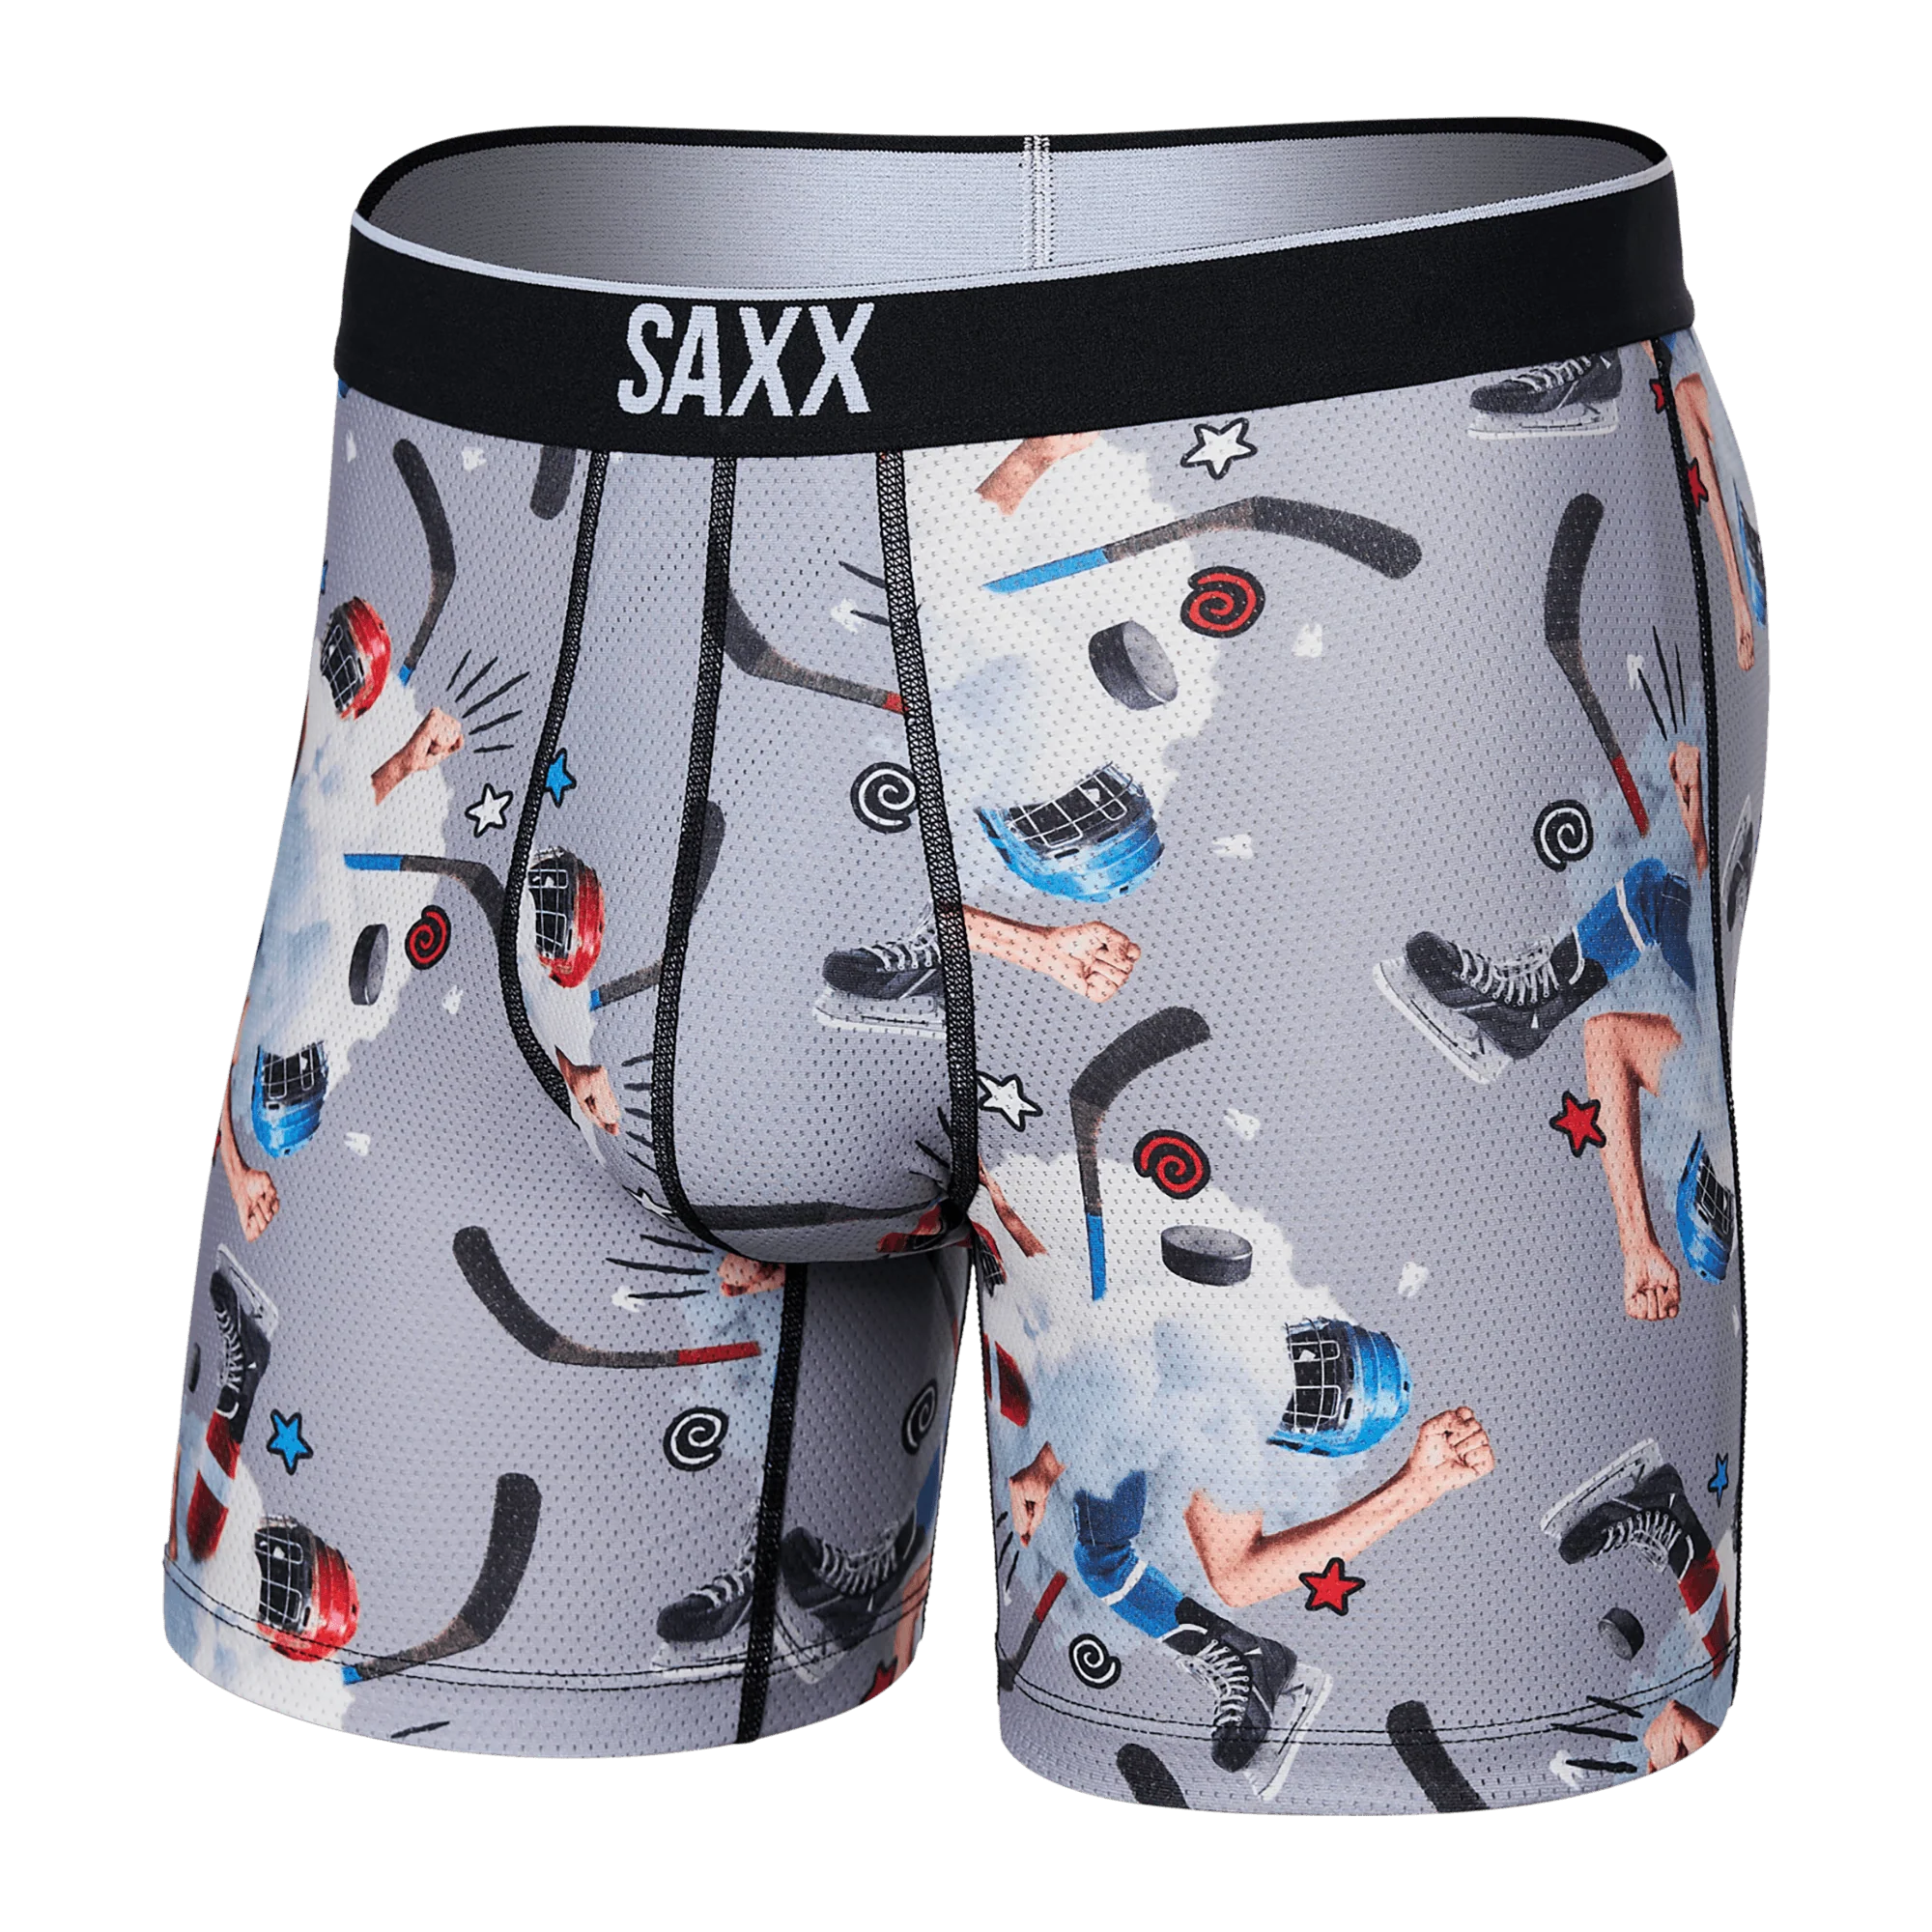 'SAXX Volt Breathable Mesh Boxer Brief - Timeout' in 'Grey' colour